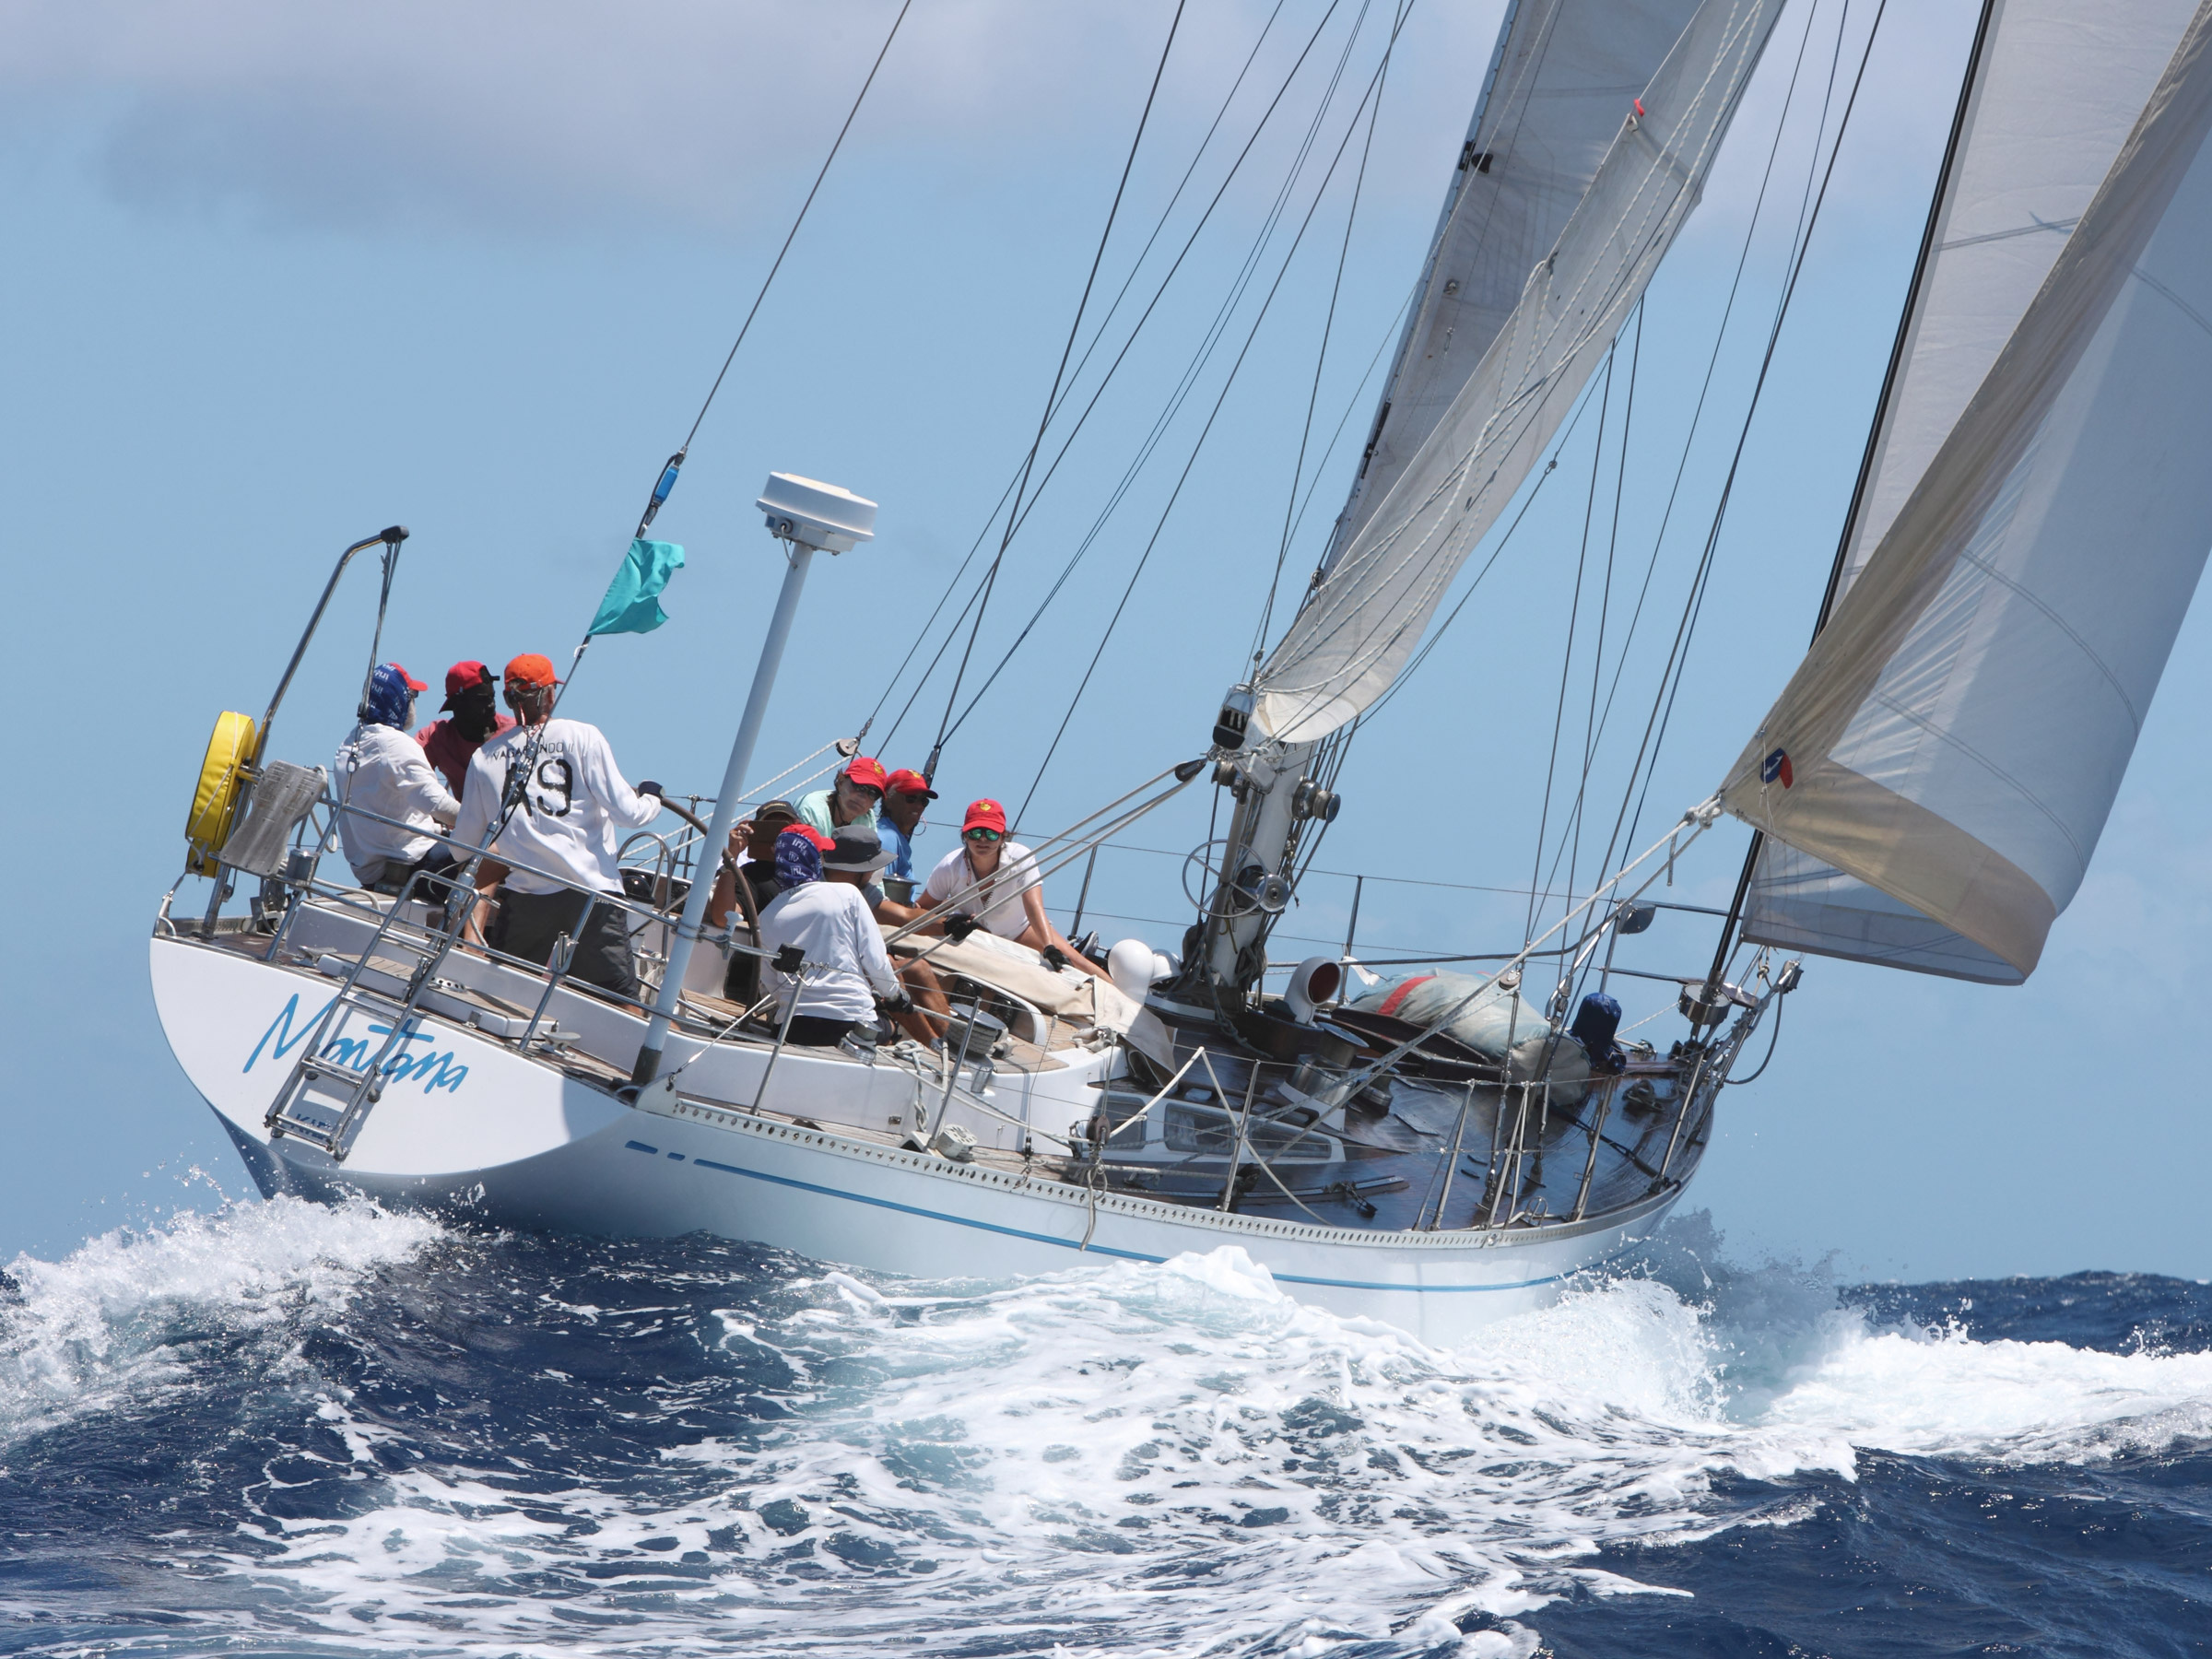 Yacht Racing: Swan 48 Montana, A sailing sport, A sport in which sailboats competition on the water. 2400x1800 HD Background.